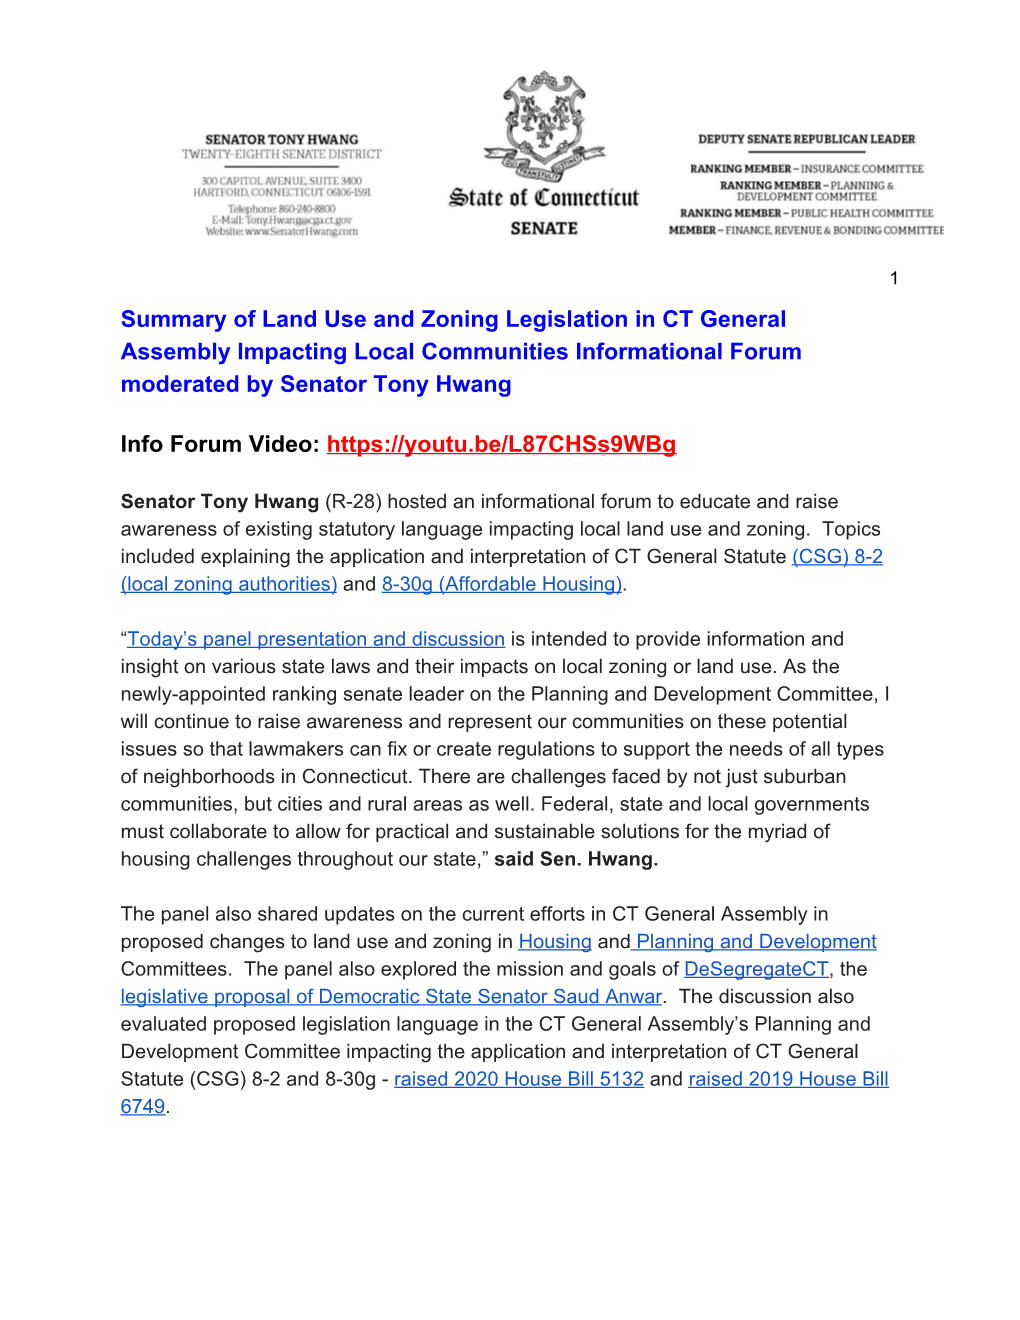 Summary of Land Use and Zoning Legislation in CT General Assembly Impacting Local Communities Informational Forum Moderated by Senator Tony Hwang